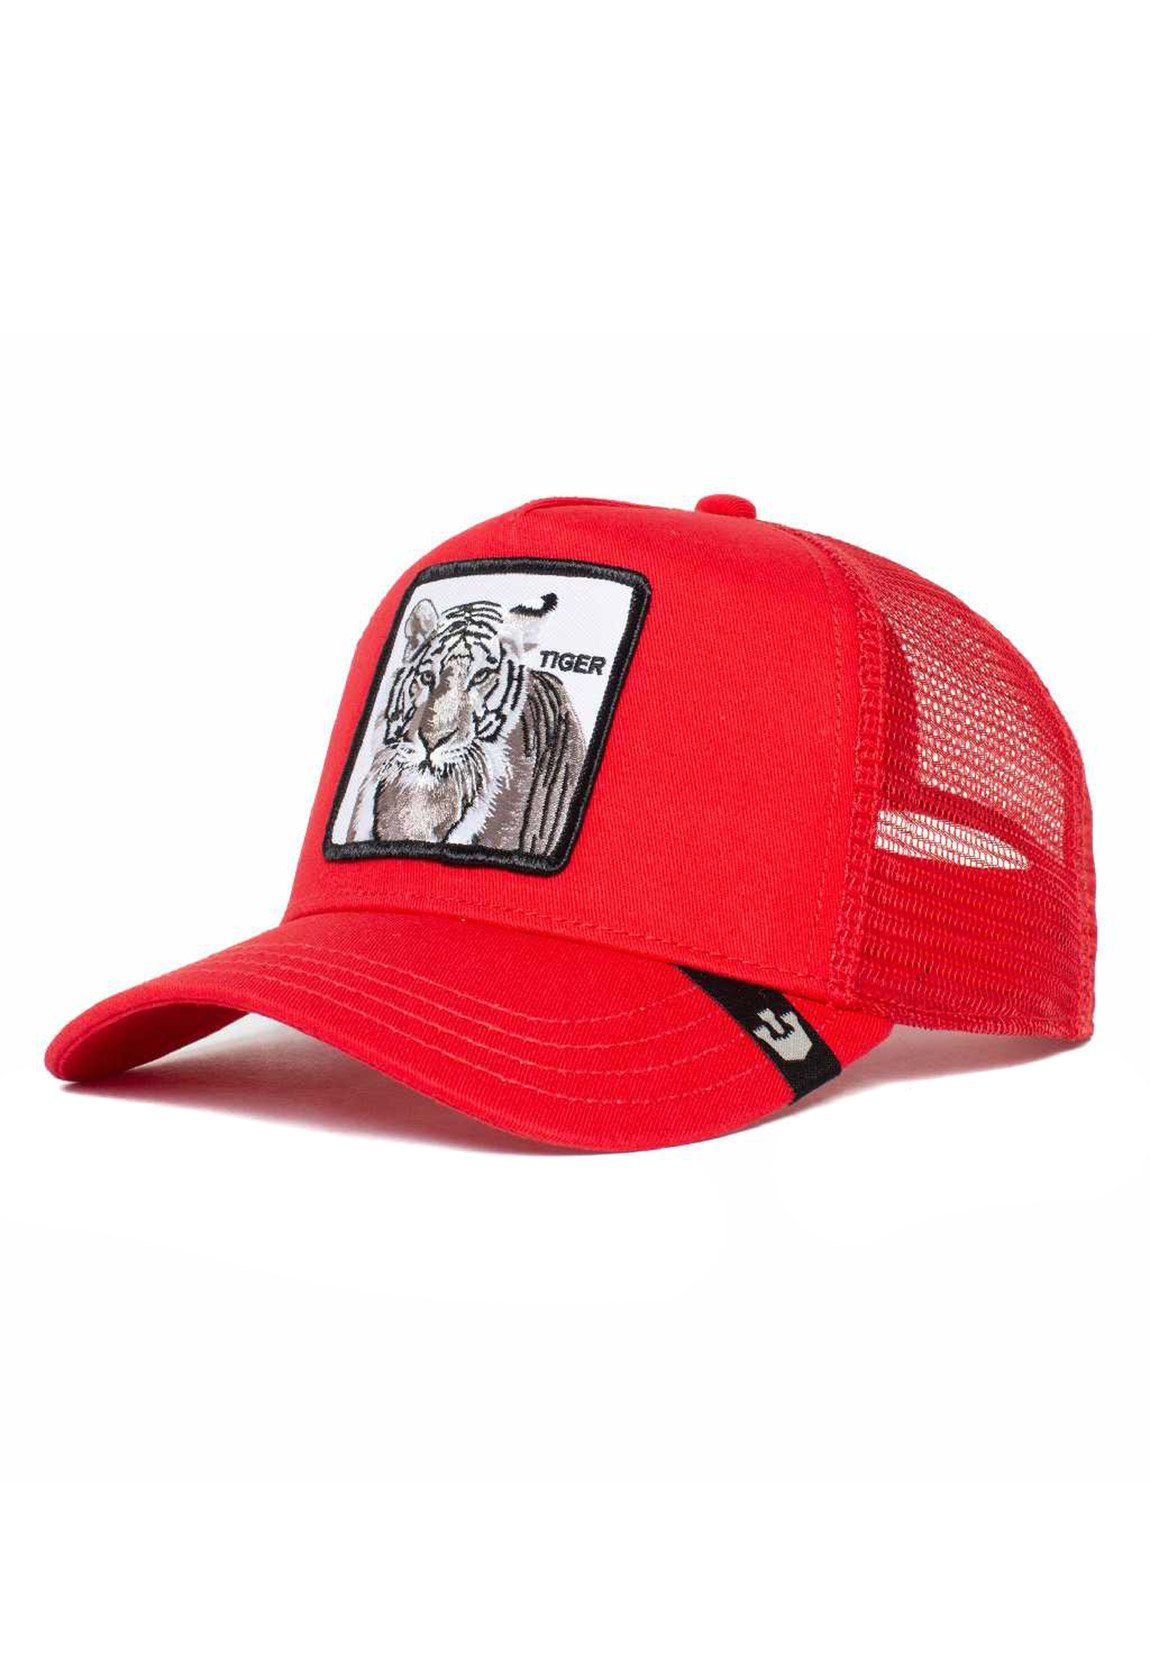 GOORIN Bros. Trucker Cap Goorin Bros. Trucker Cap WHITE TIGER Red Rot